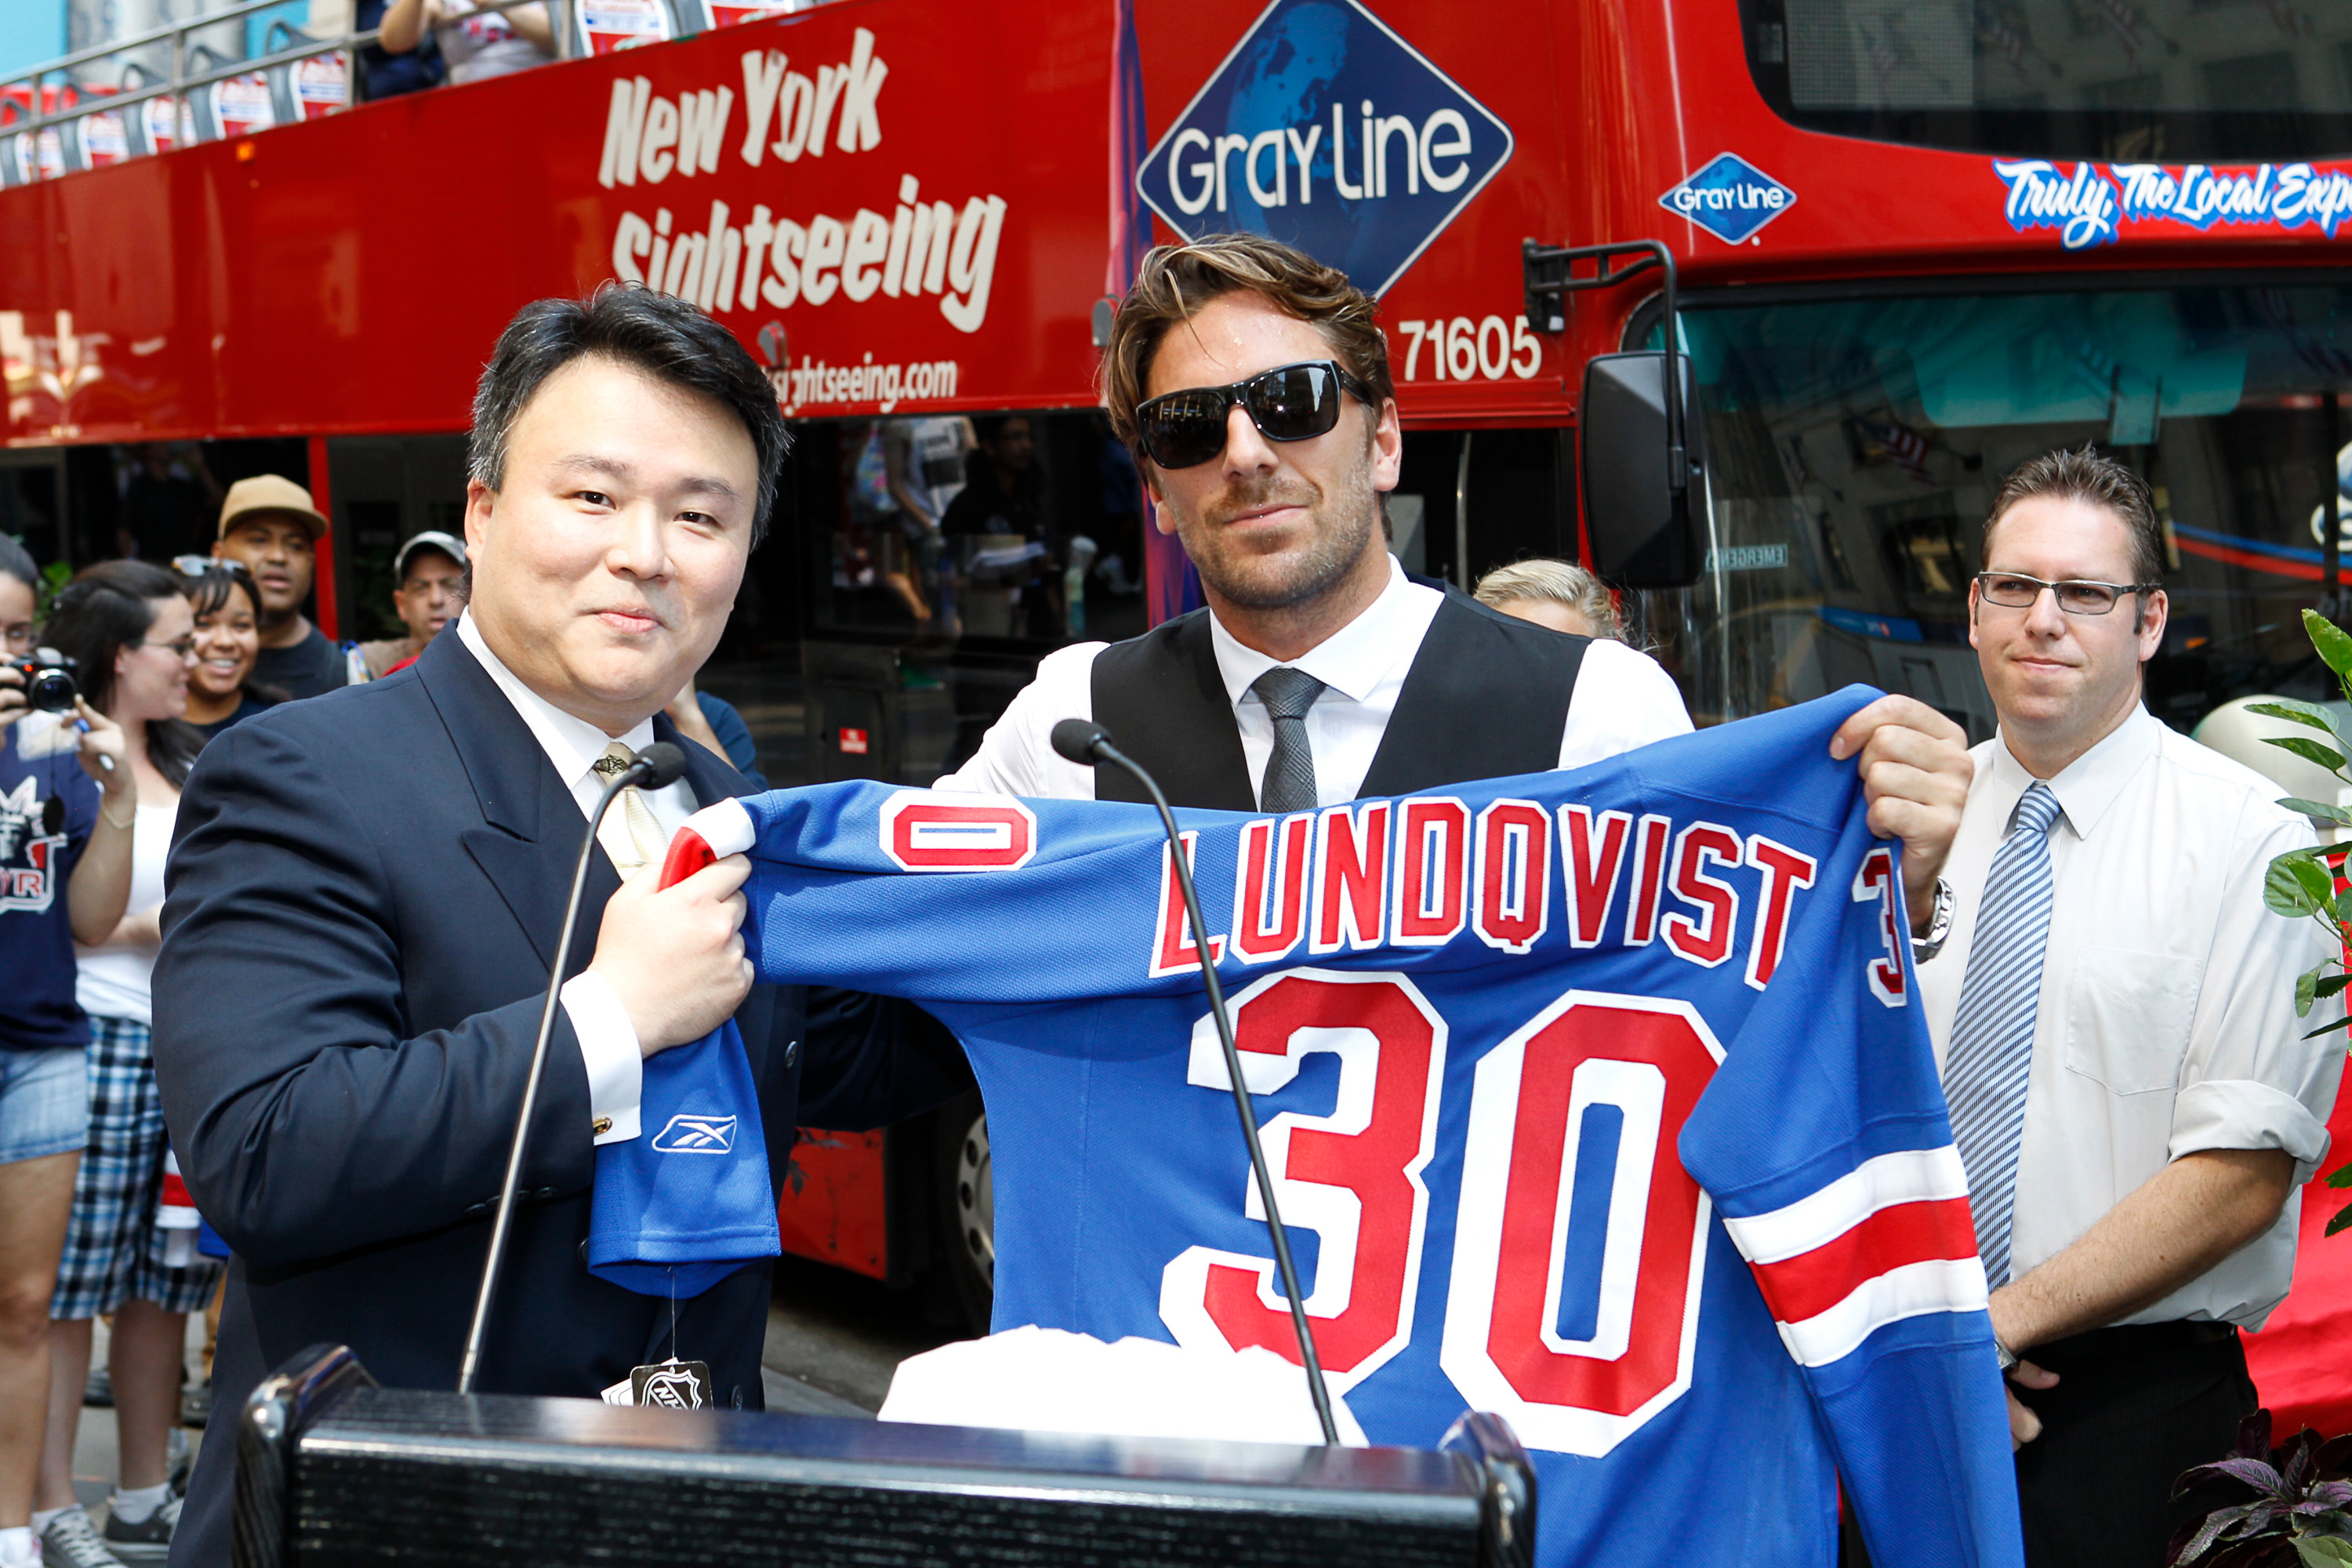 Henrik Lundqvist presents his jersey to David W. Chien at Ride of Fame Induction Ceremony (August 31st, 2010).